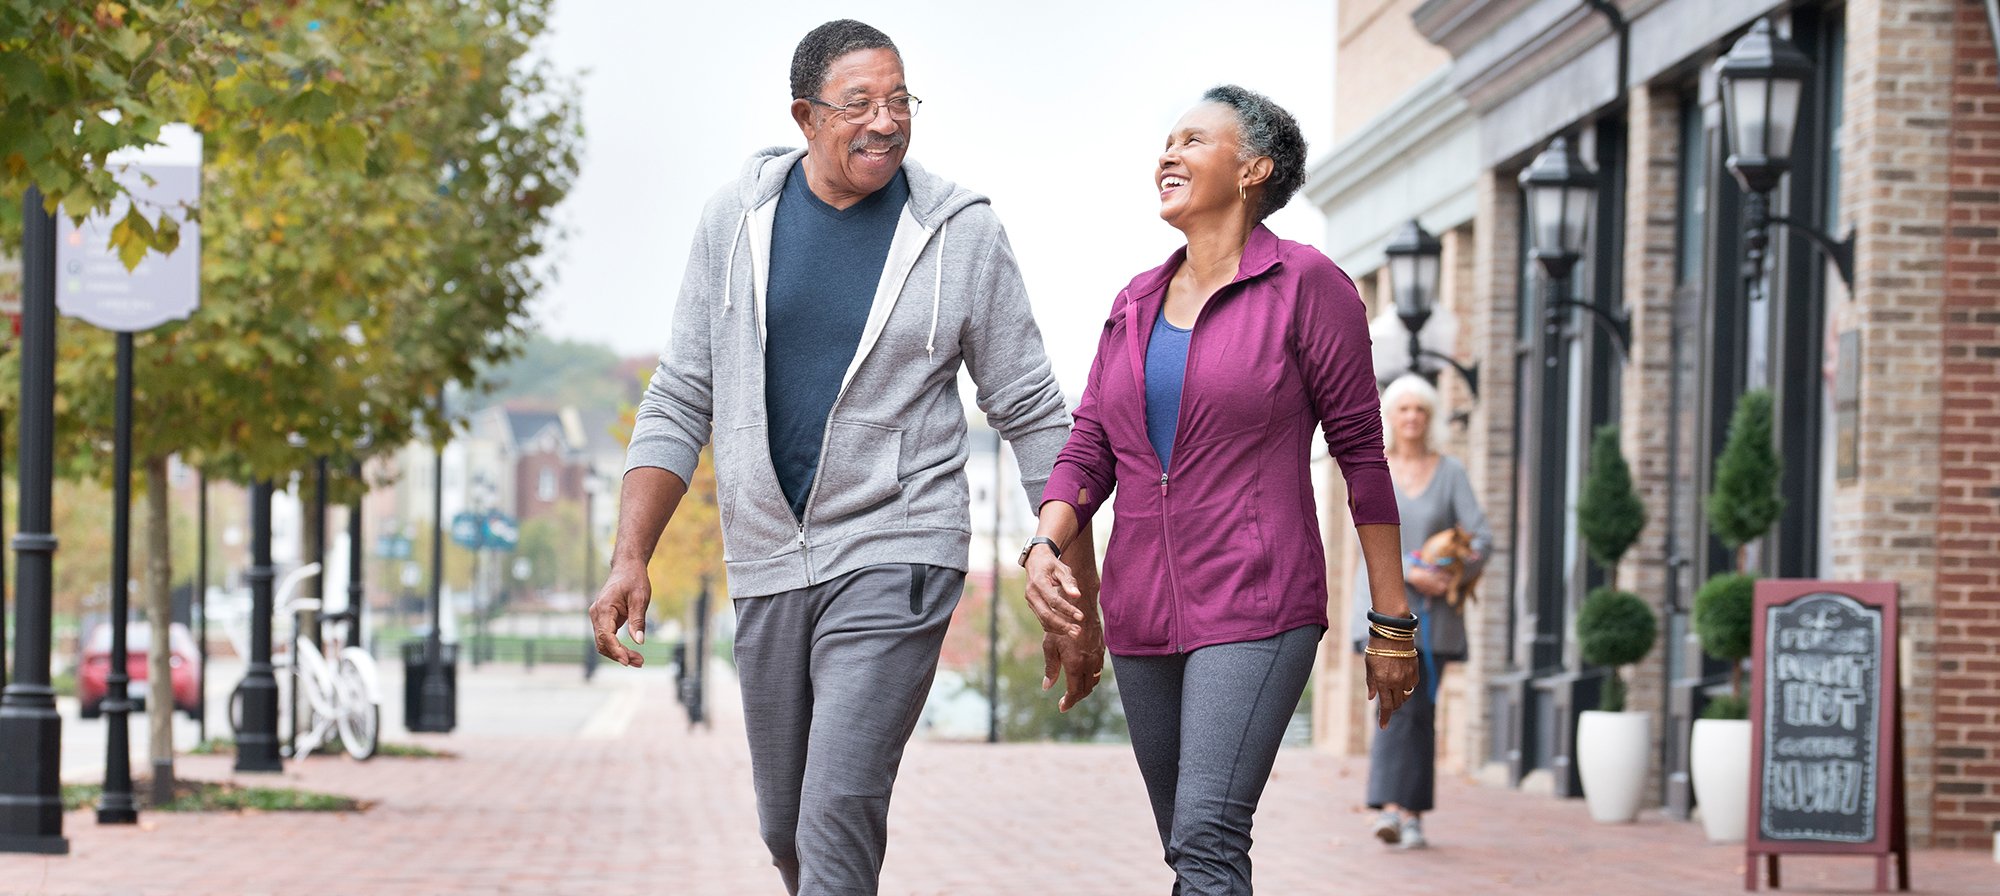 Support Healthy Blood Sugar Levels With a Post-Meal Walk